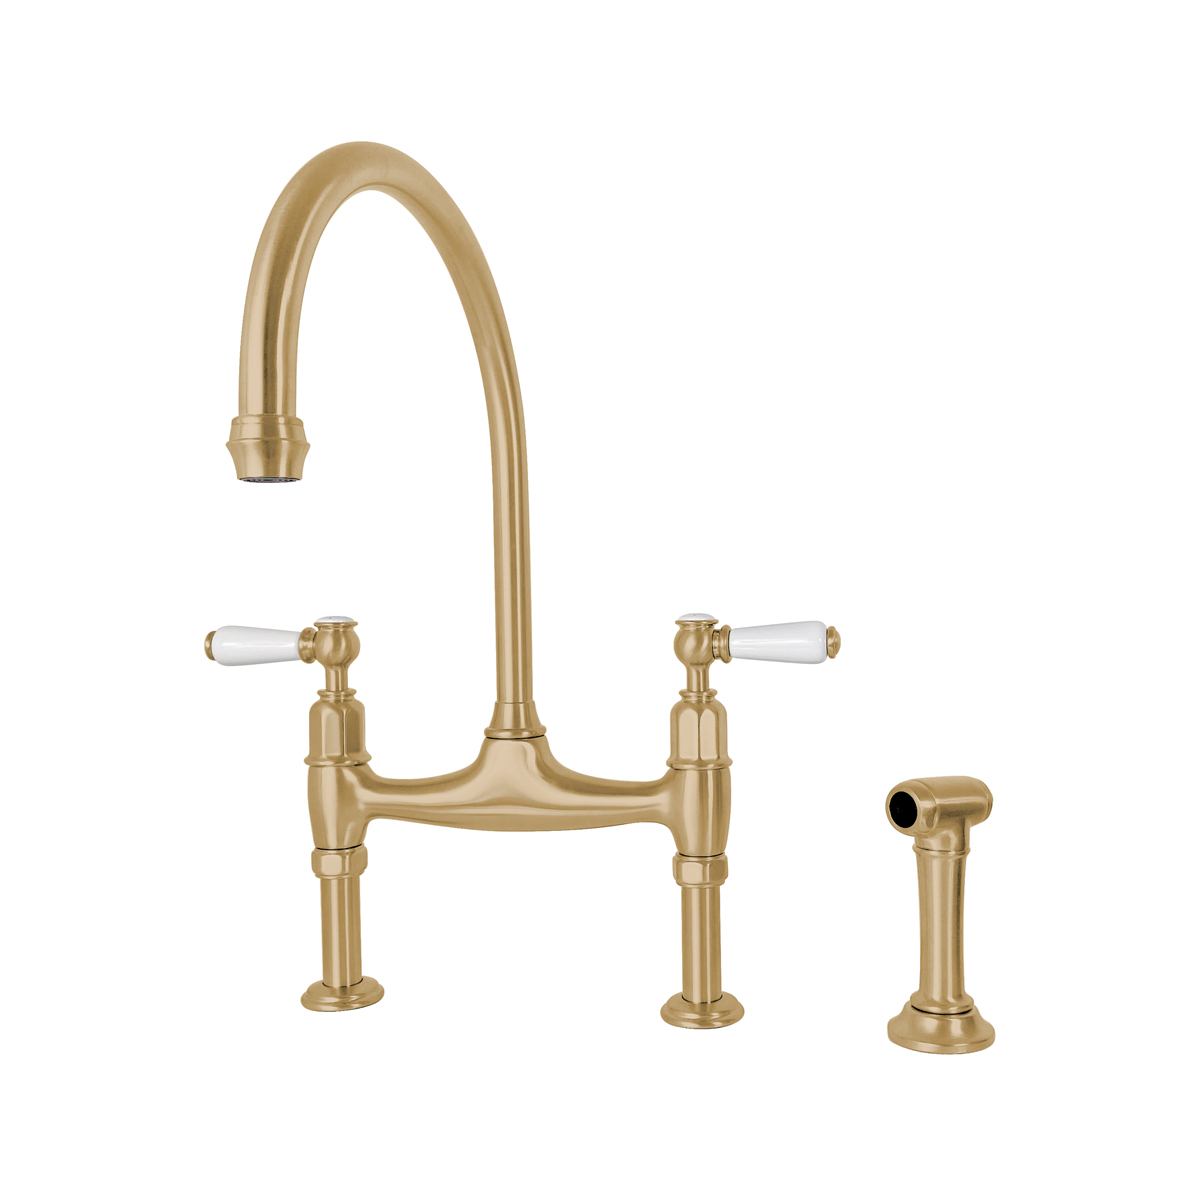 Shaws by Perrin & Rowe Pendleton bridge mixer with spray rinse in satin brass. Ionian style kitchen tap with straight unions AUSH.4173. Distributed in Australia by Luxe by Design, Brisbane.